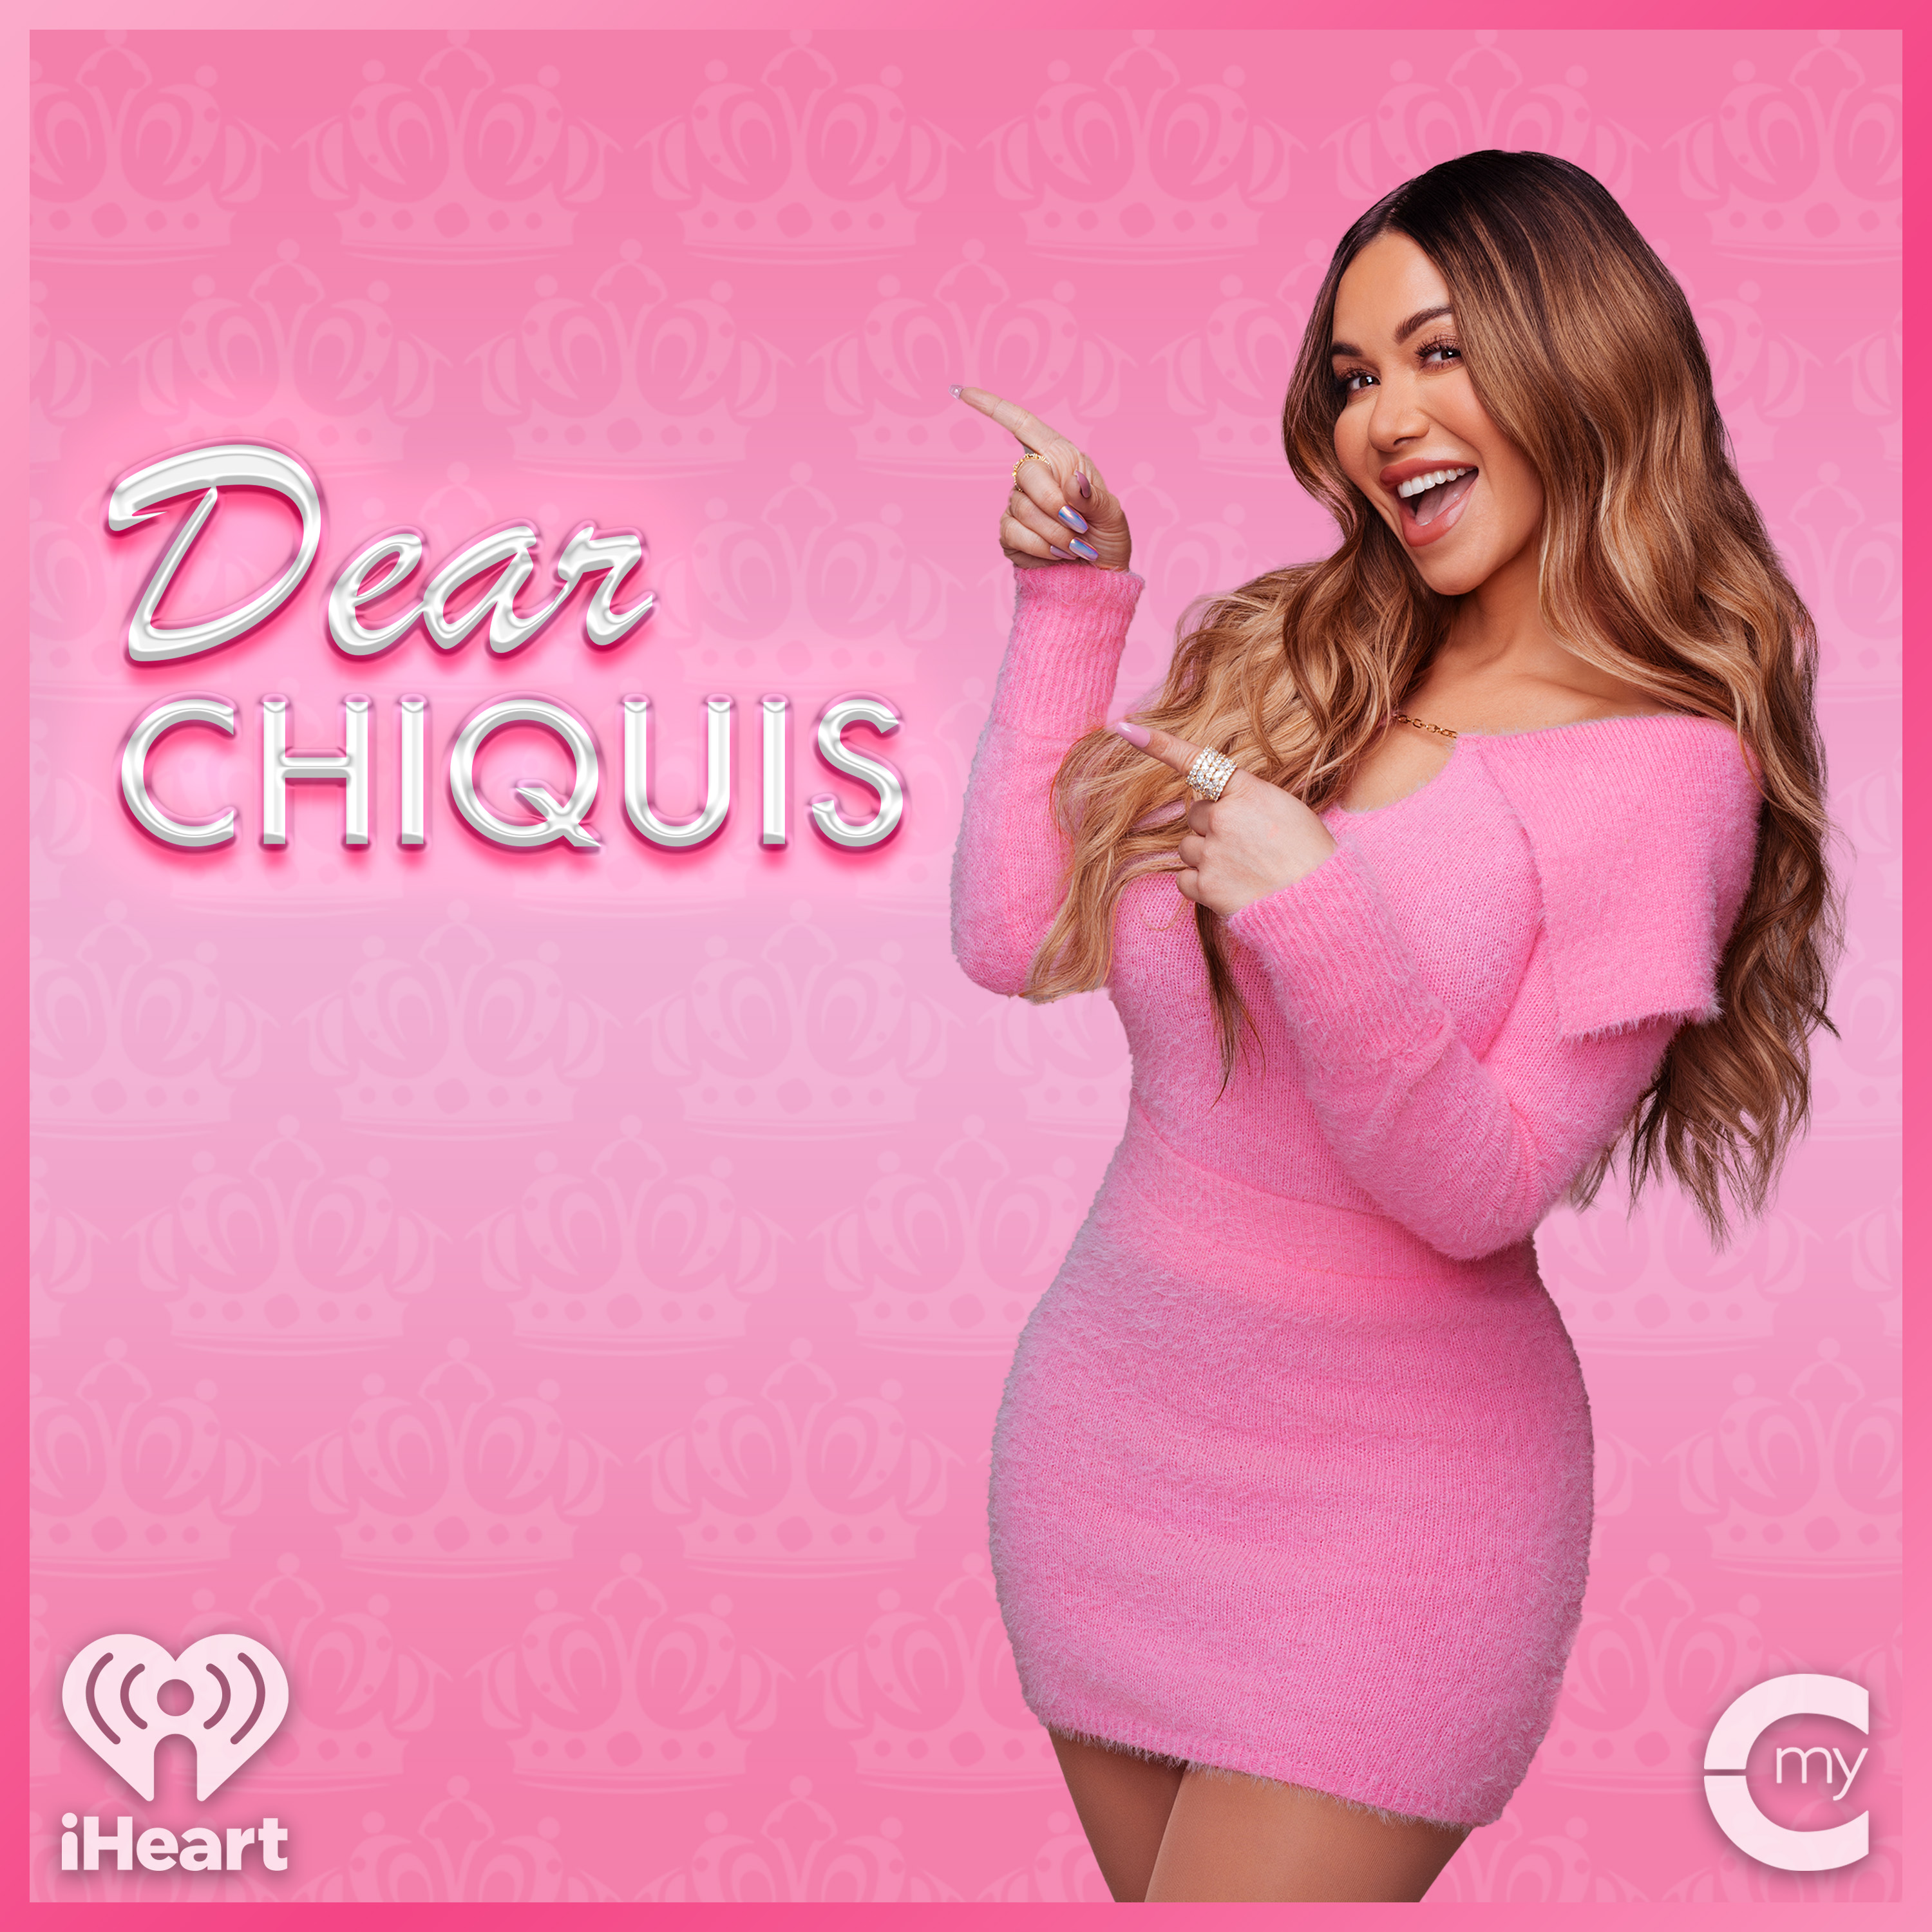 Dear Chiquis: An Affair with my Co-Worker, Should I Date a Womanizer and My Uncle Lupillo on Casa de los Famosos